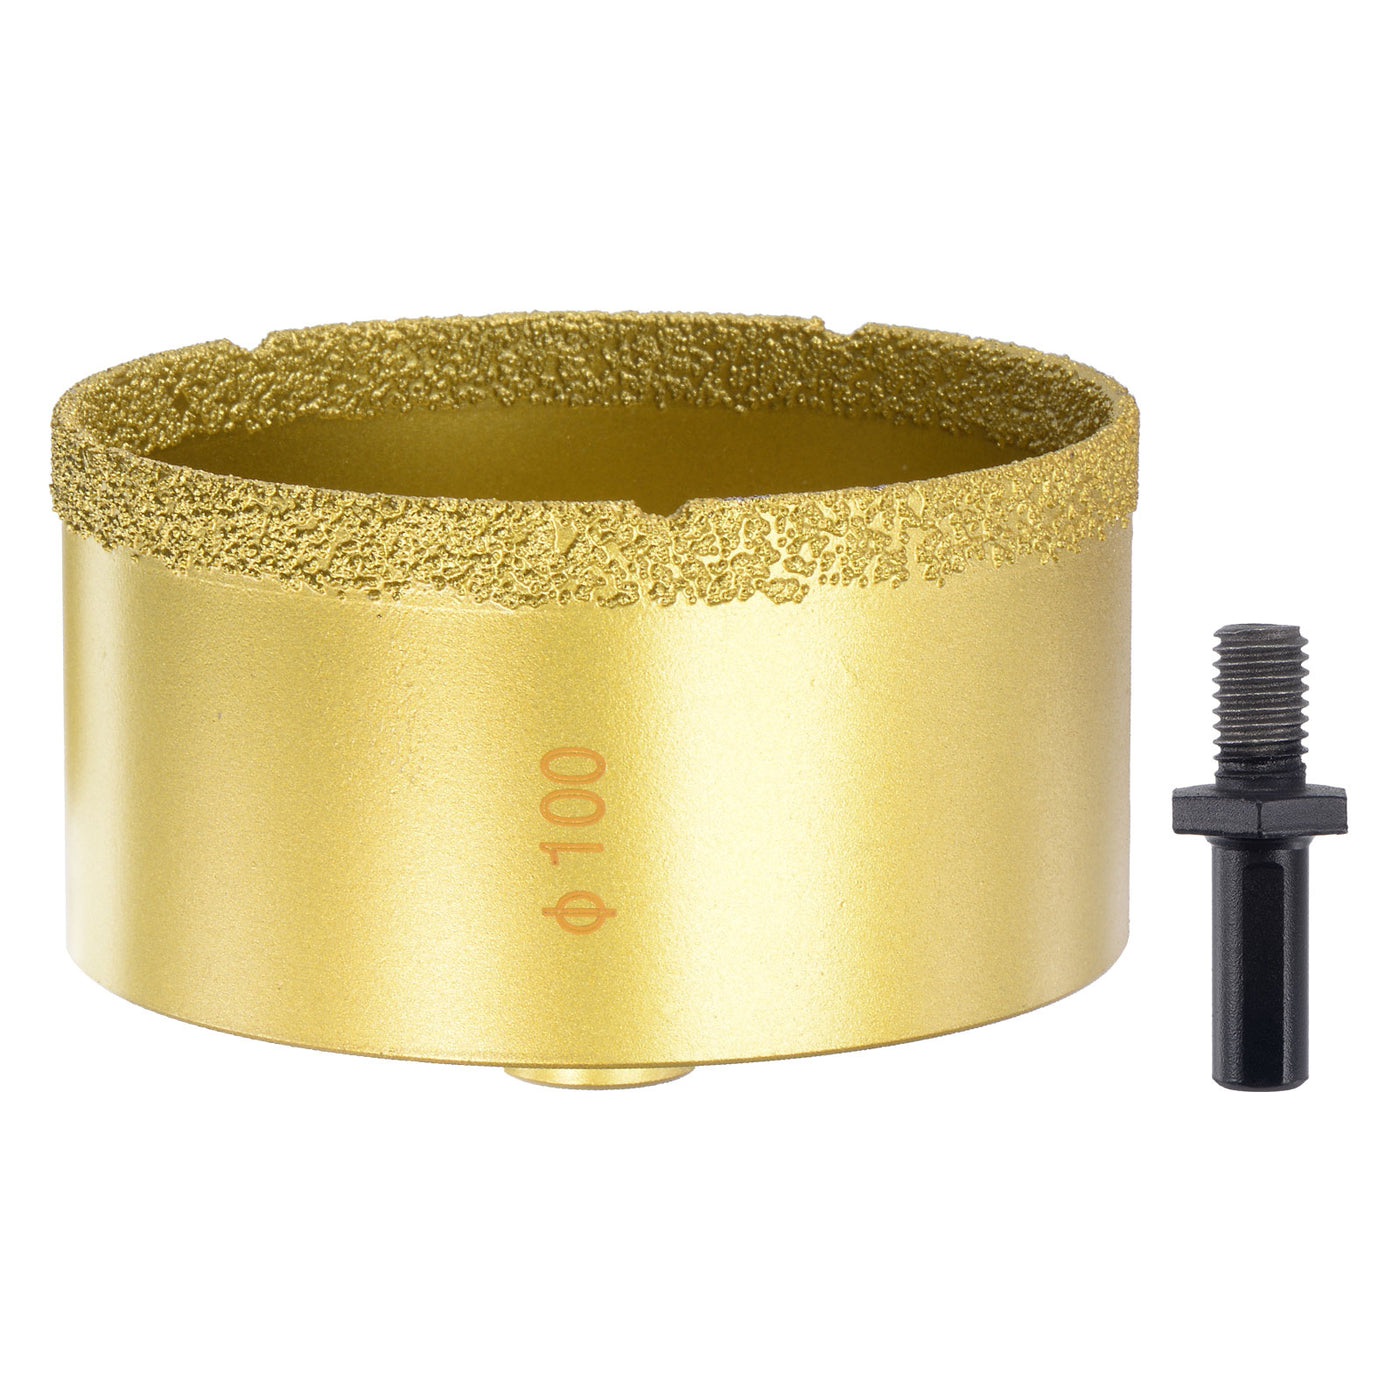 Uxcell Uxcell 80mm Brazed Diamond Core Drill Bits with M10 Arbor Adapter for Tile Marble Stone